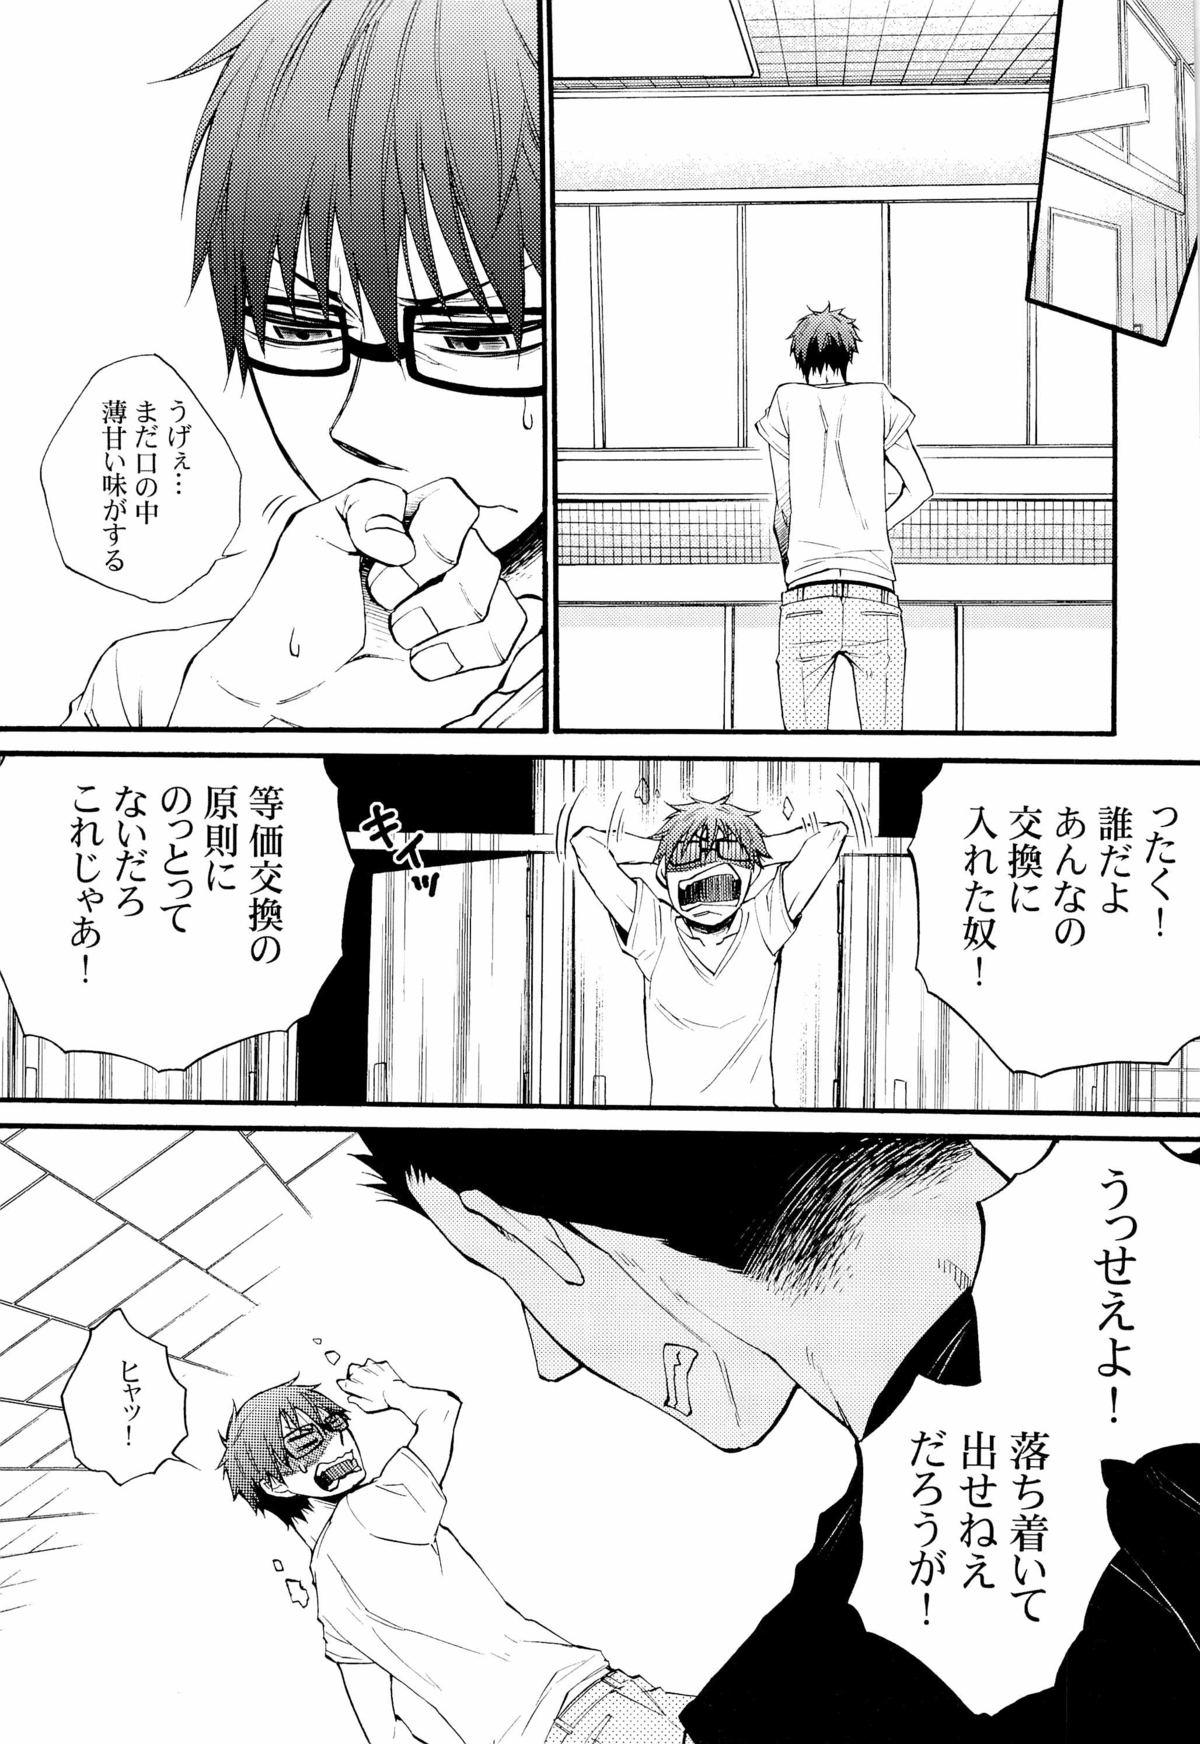 Polla AFTER TASTE - Silver spoon Gay Outdoors - Page 7